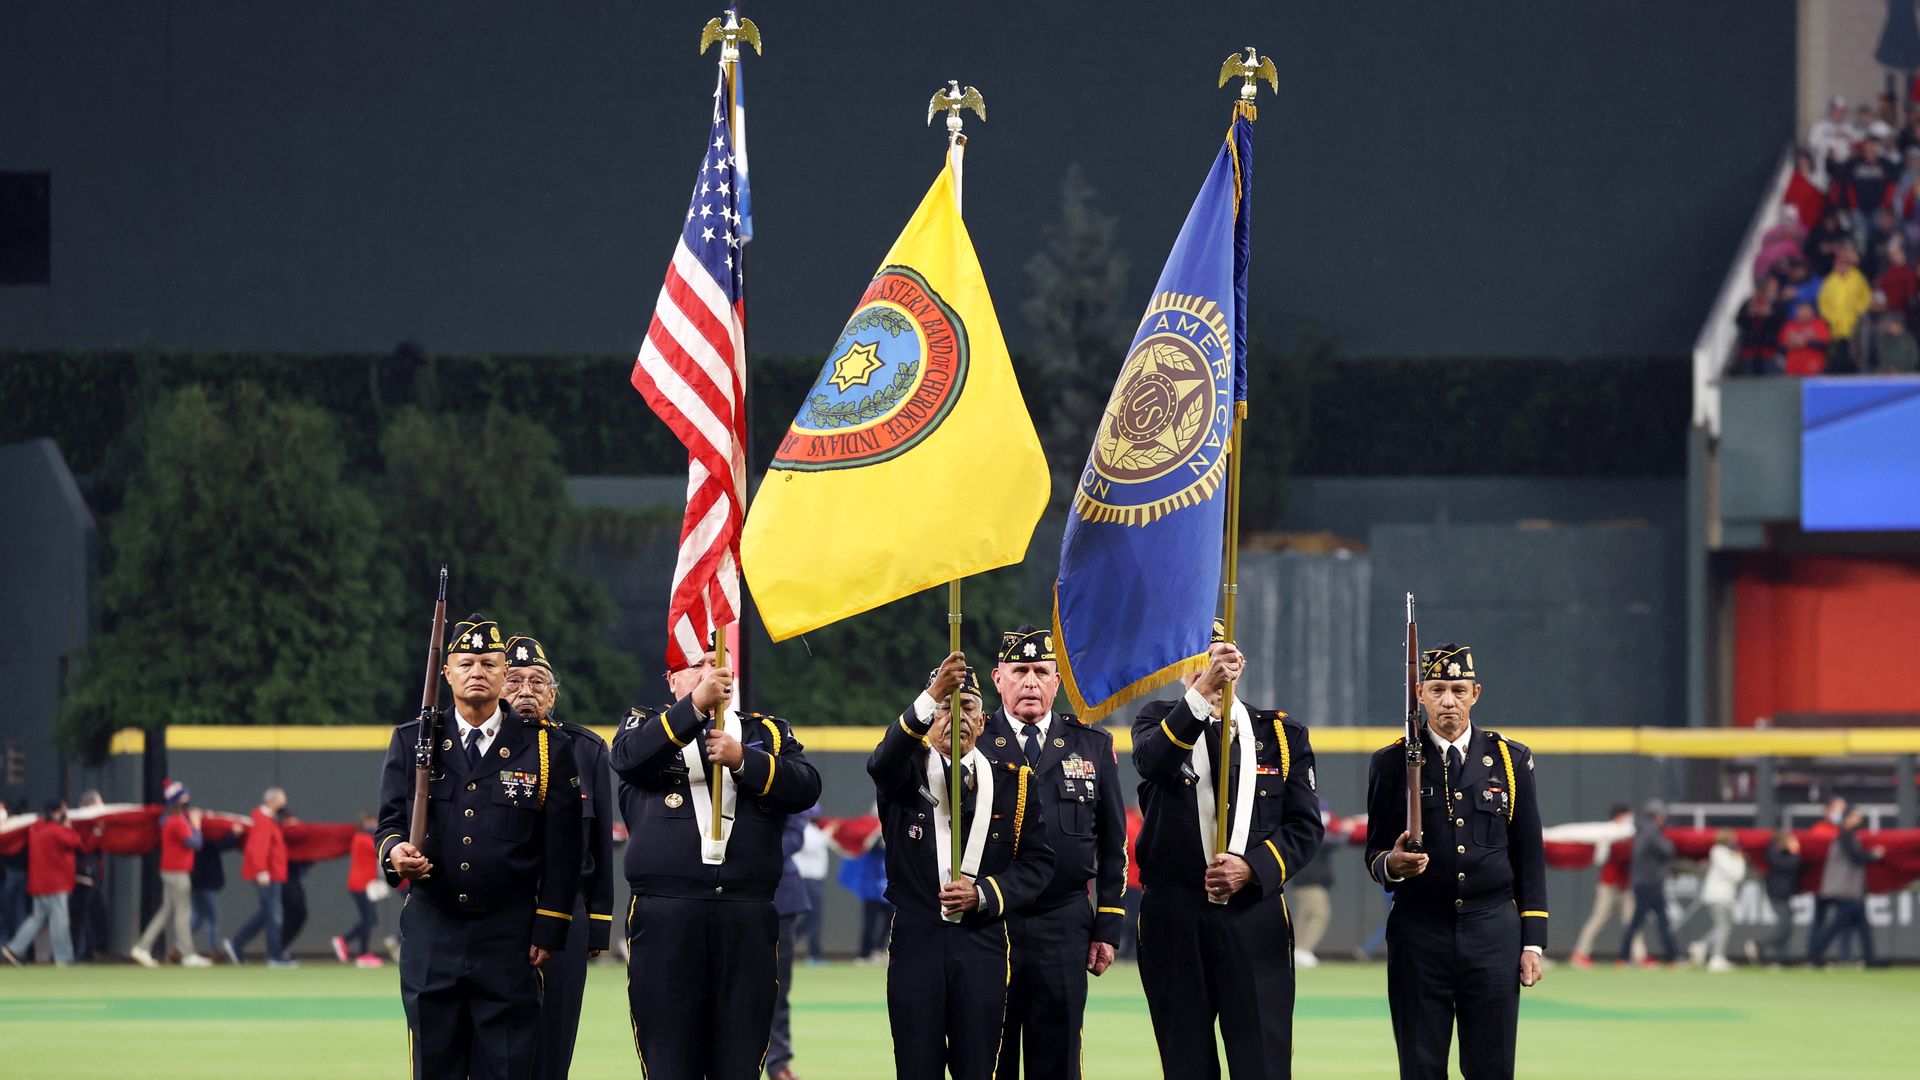 The American Legion Steve Young Deer Post 143, Eastern Band of Cherokee Indians, presents the nation's colors and the EBCI tribal colors during the 2021 World Series.